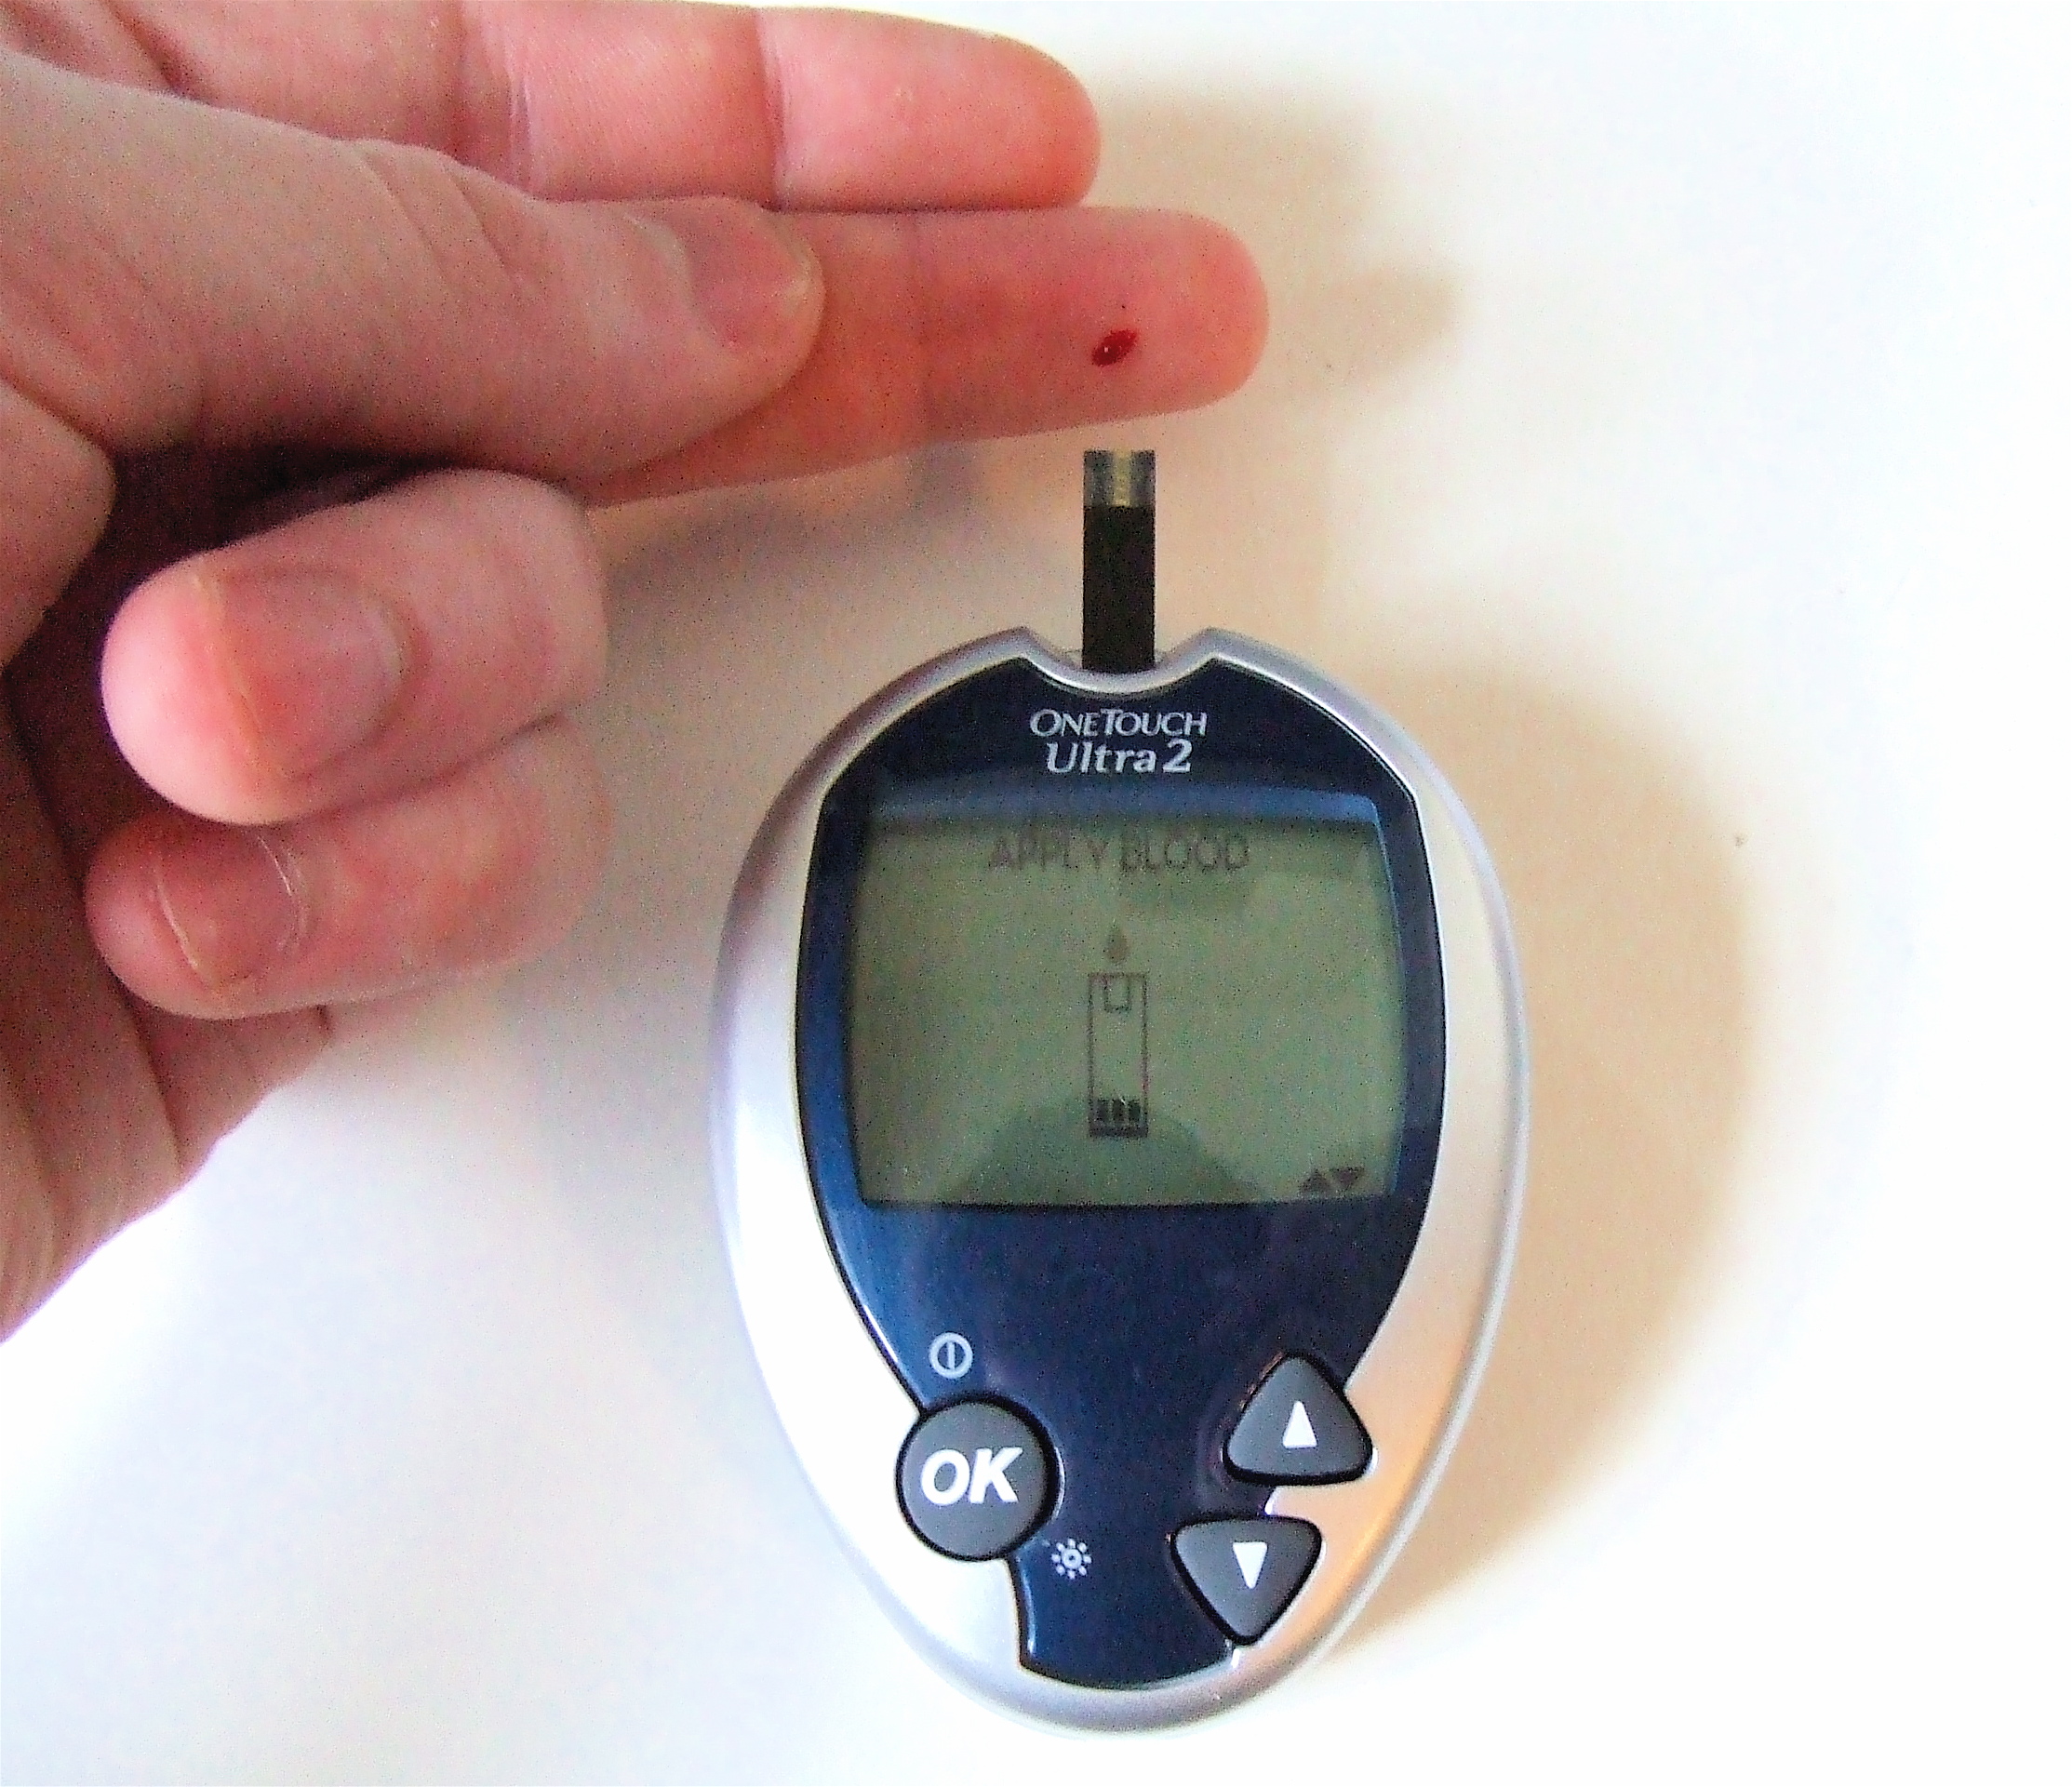 Checking Blood Sugar Without Pain â Diabetes Daily